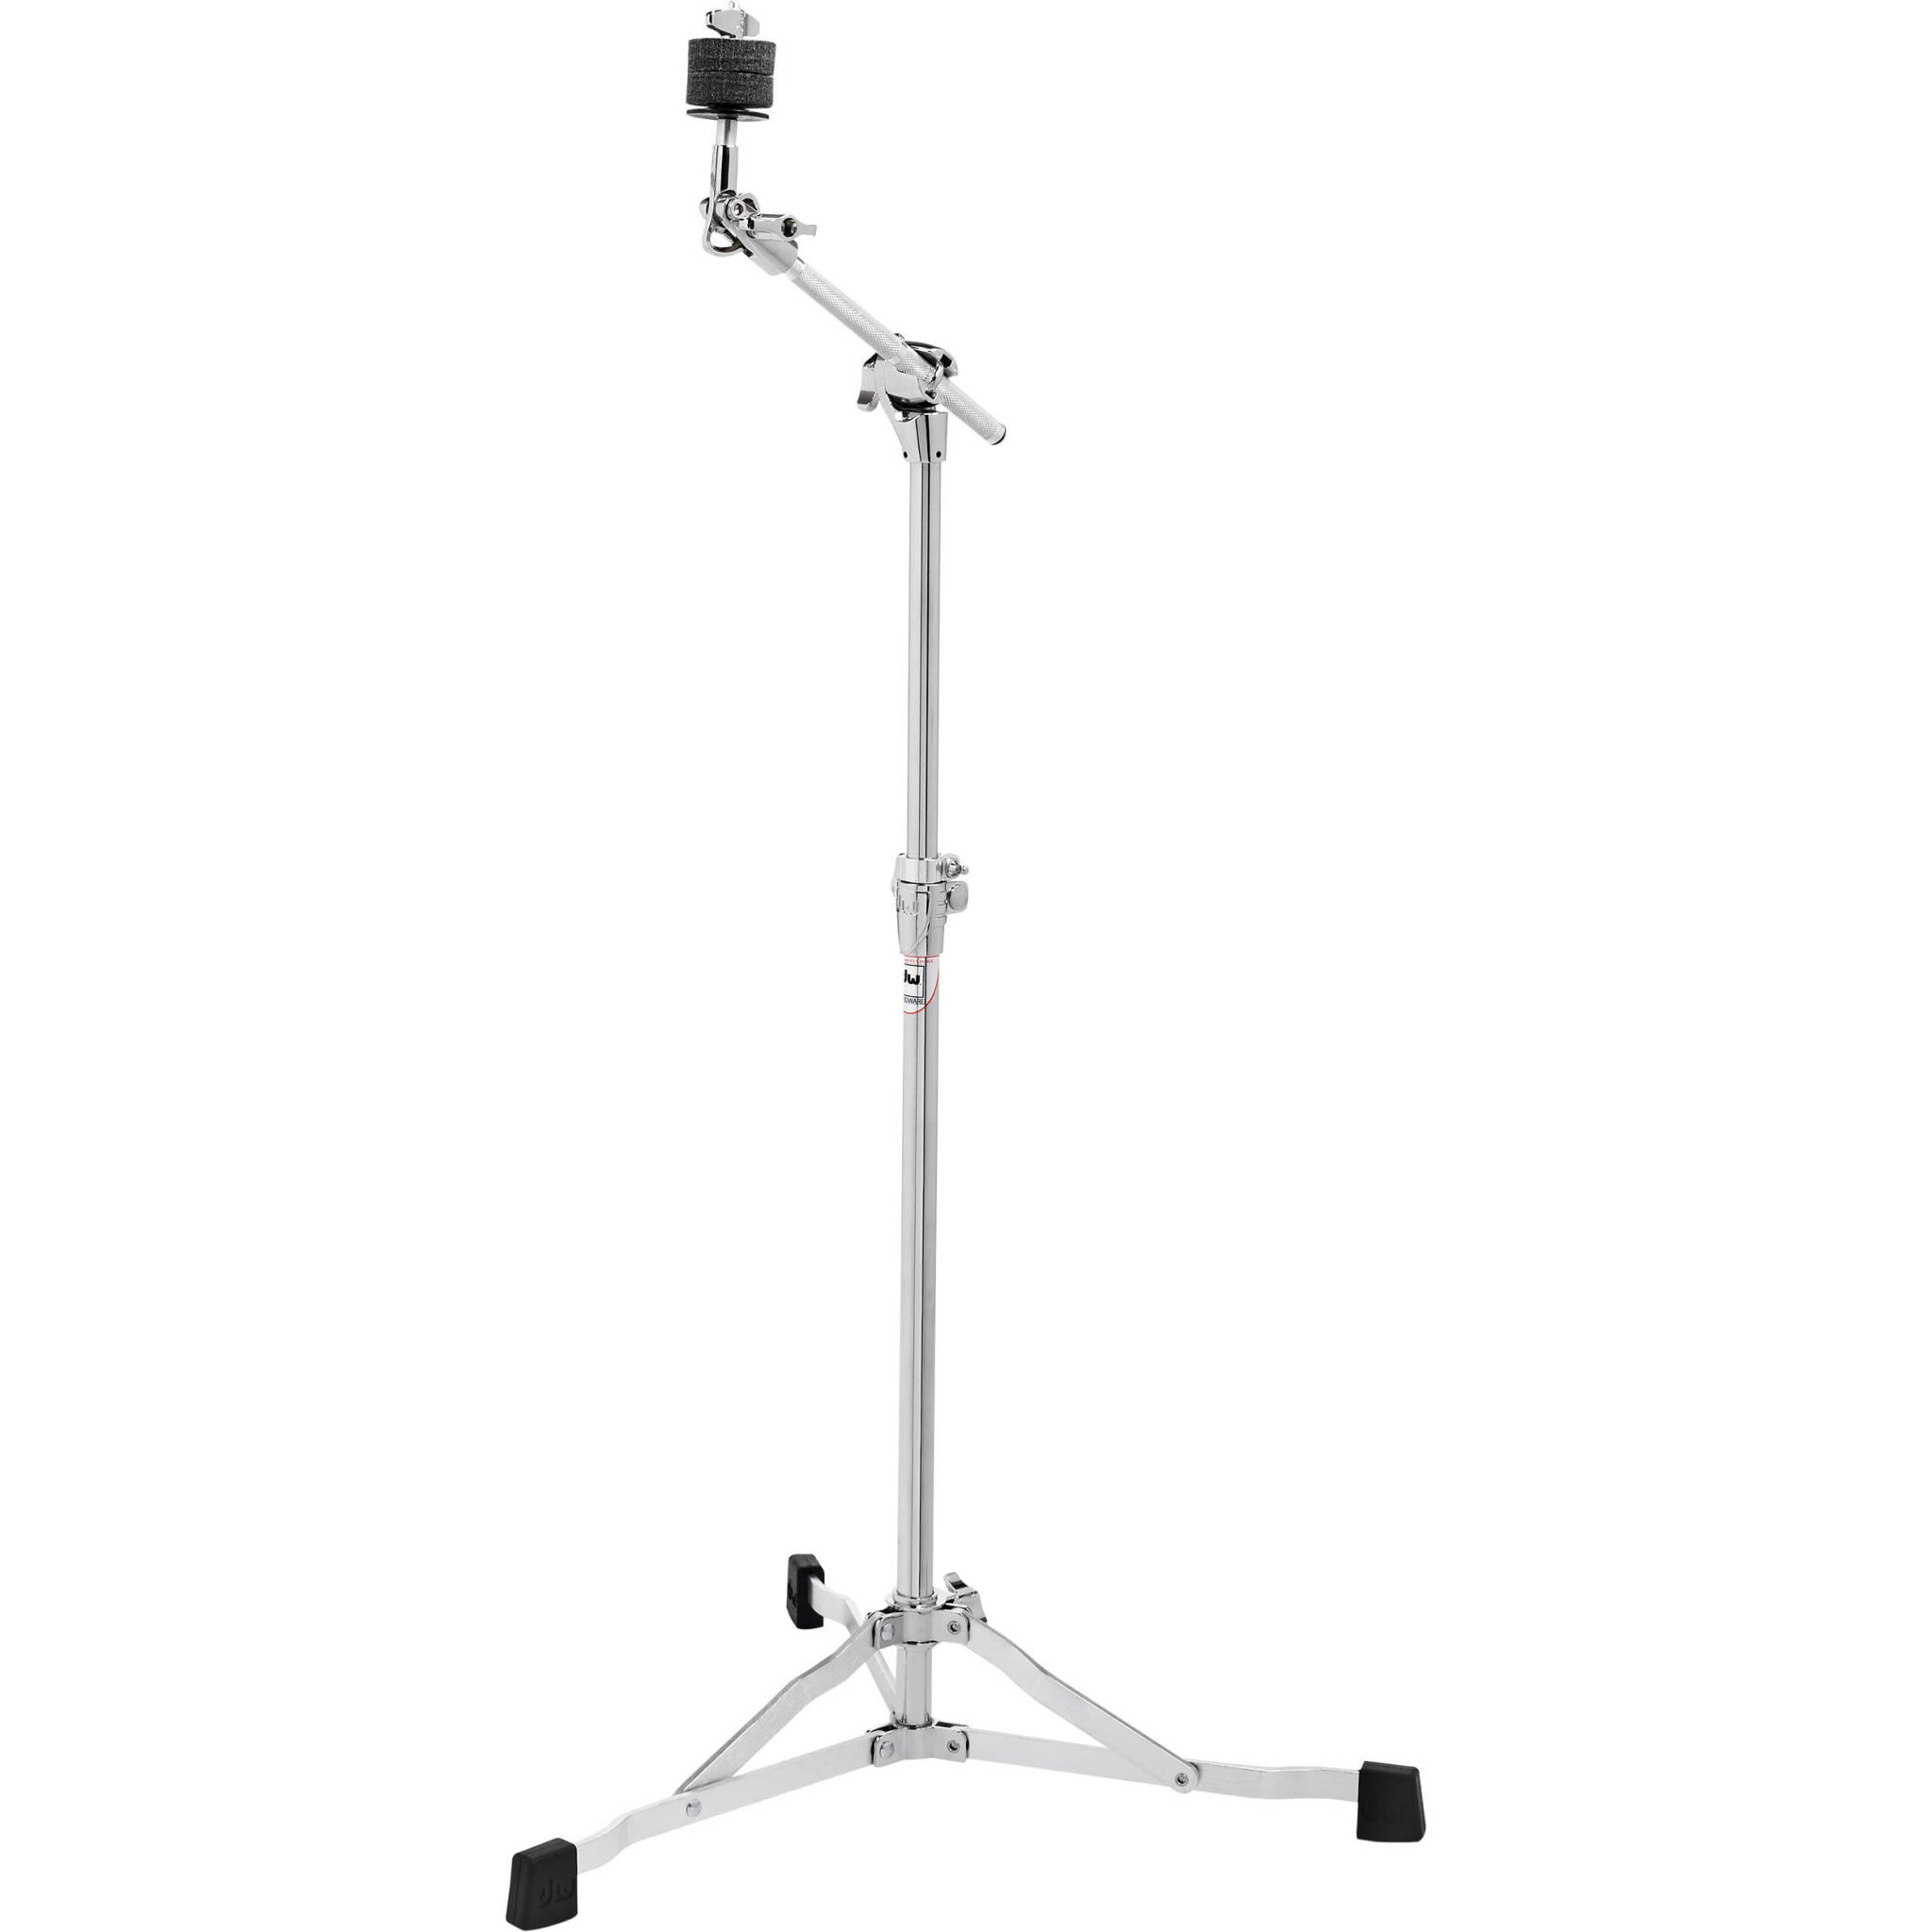 DW 6700 Ultra Light Cymbal Boom Stand (6000 series)